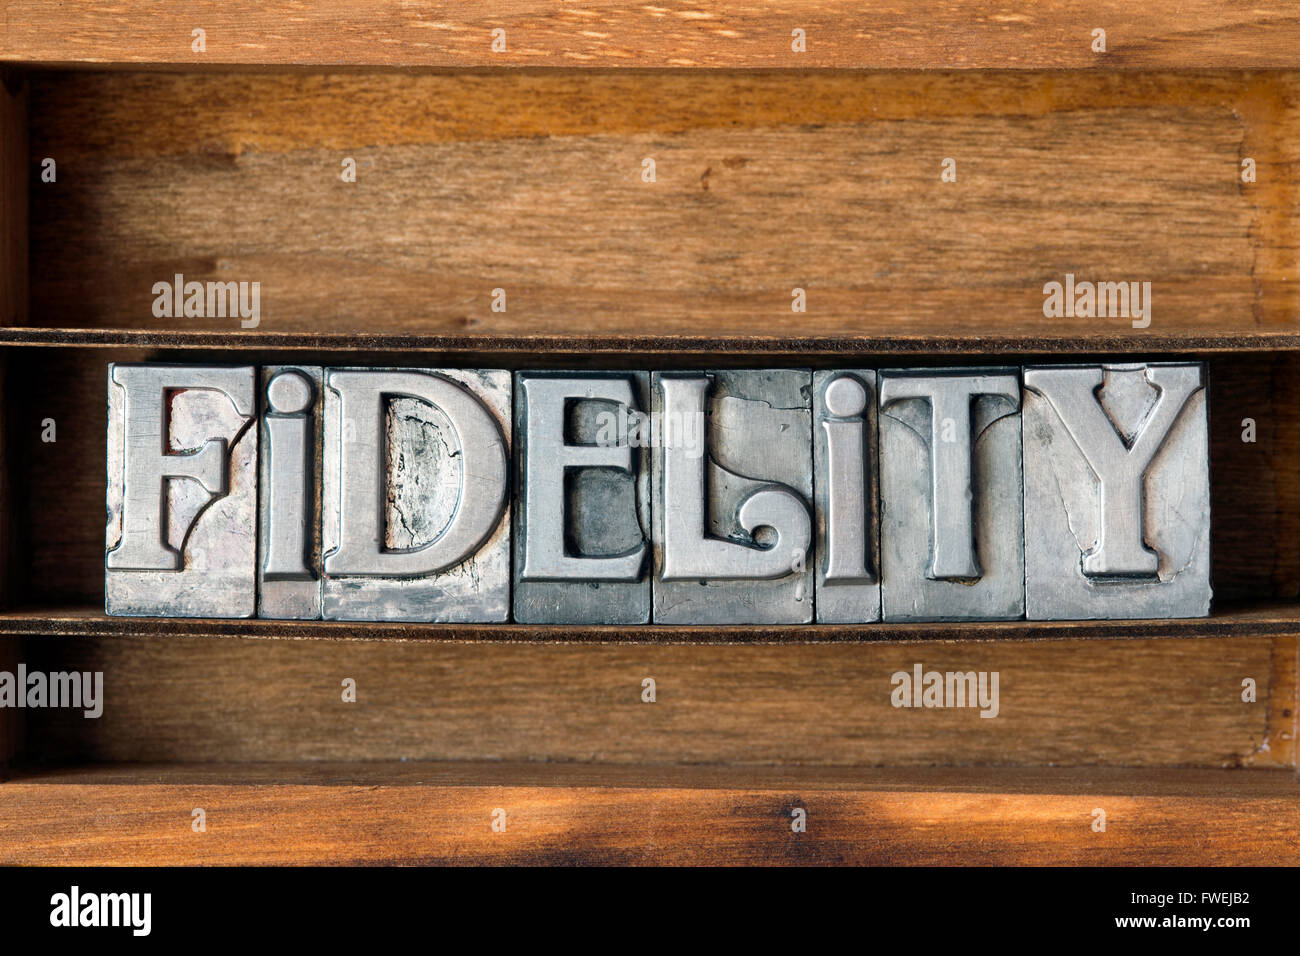 fidelity word made from metallic letterpress type on wooden tray Stock Photo